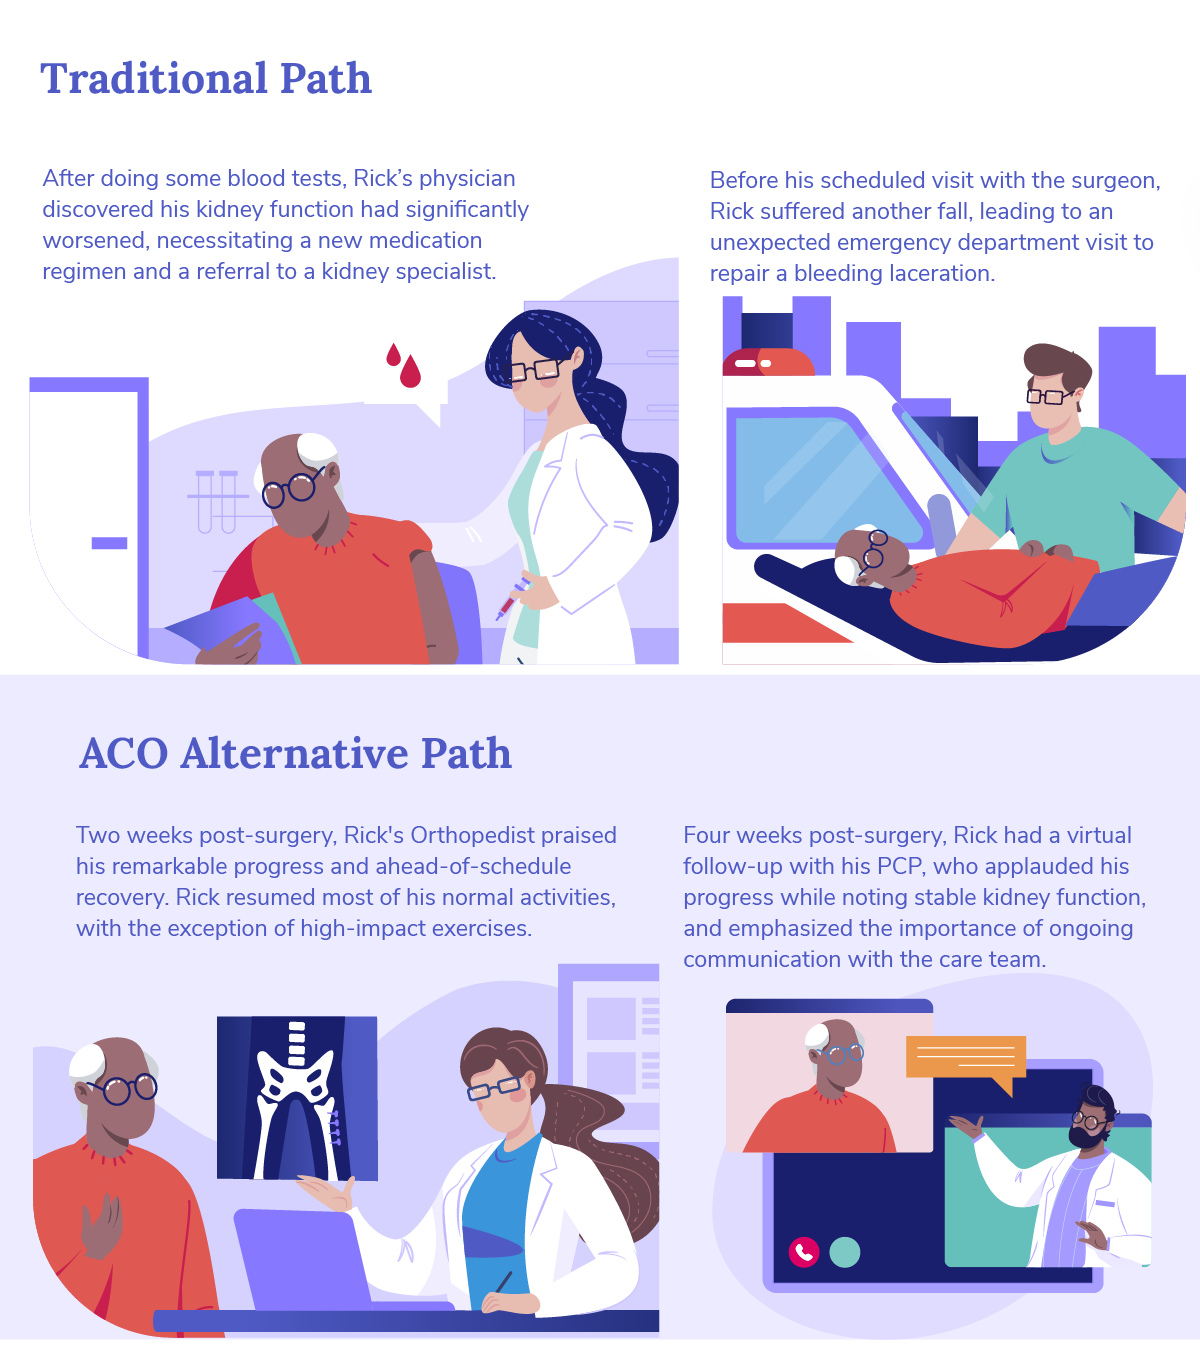 future-of-healthcare_patient-experience-traditional-vs-aco-04